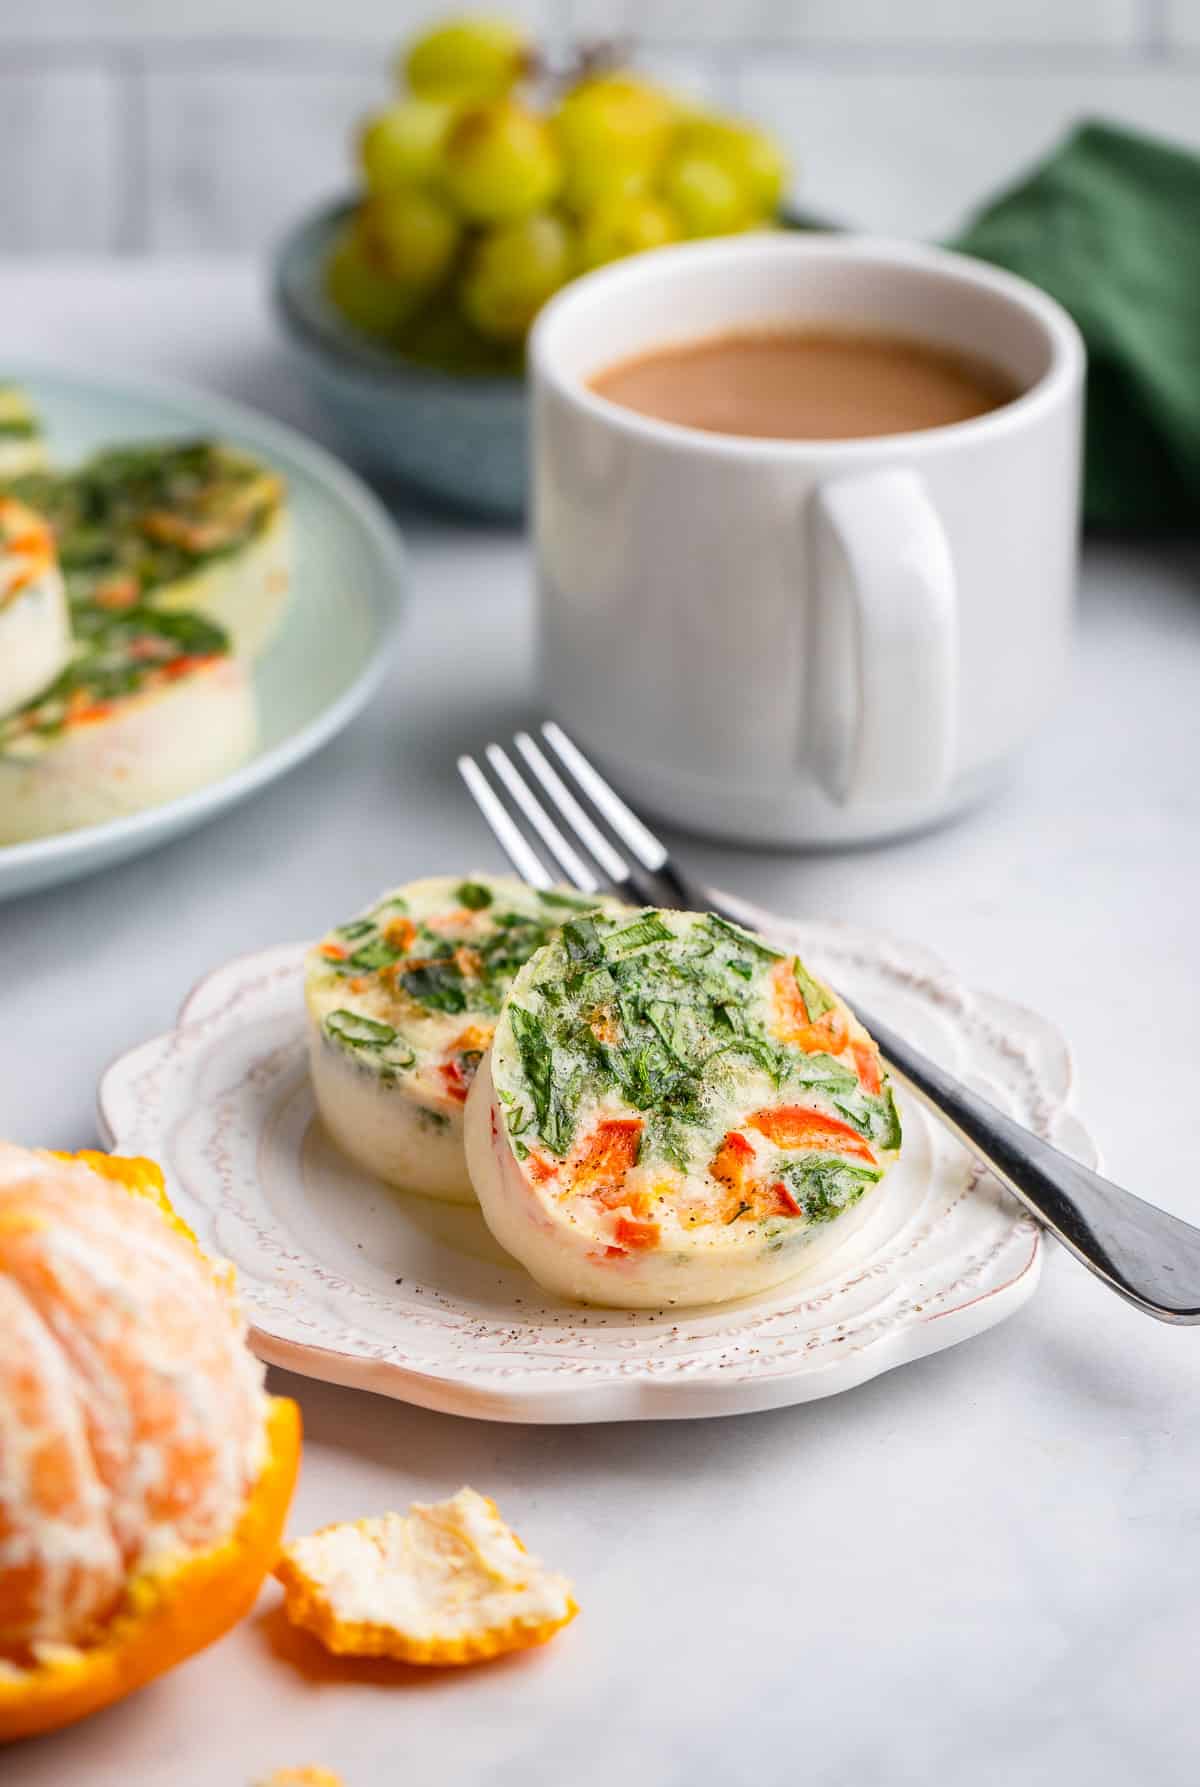 two prepared healthy egg white bites on place next to mug of coffee